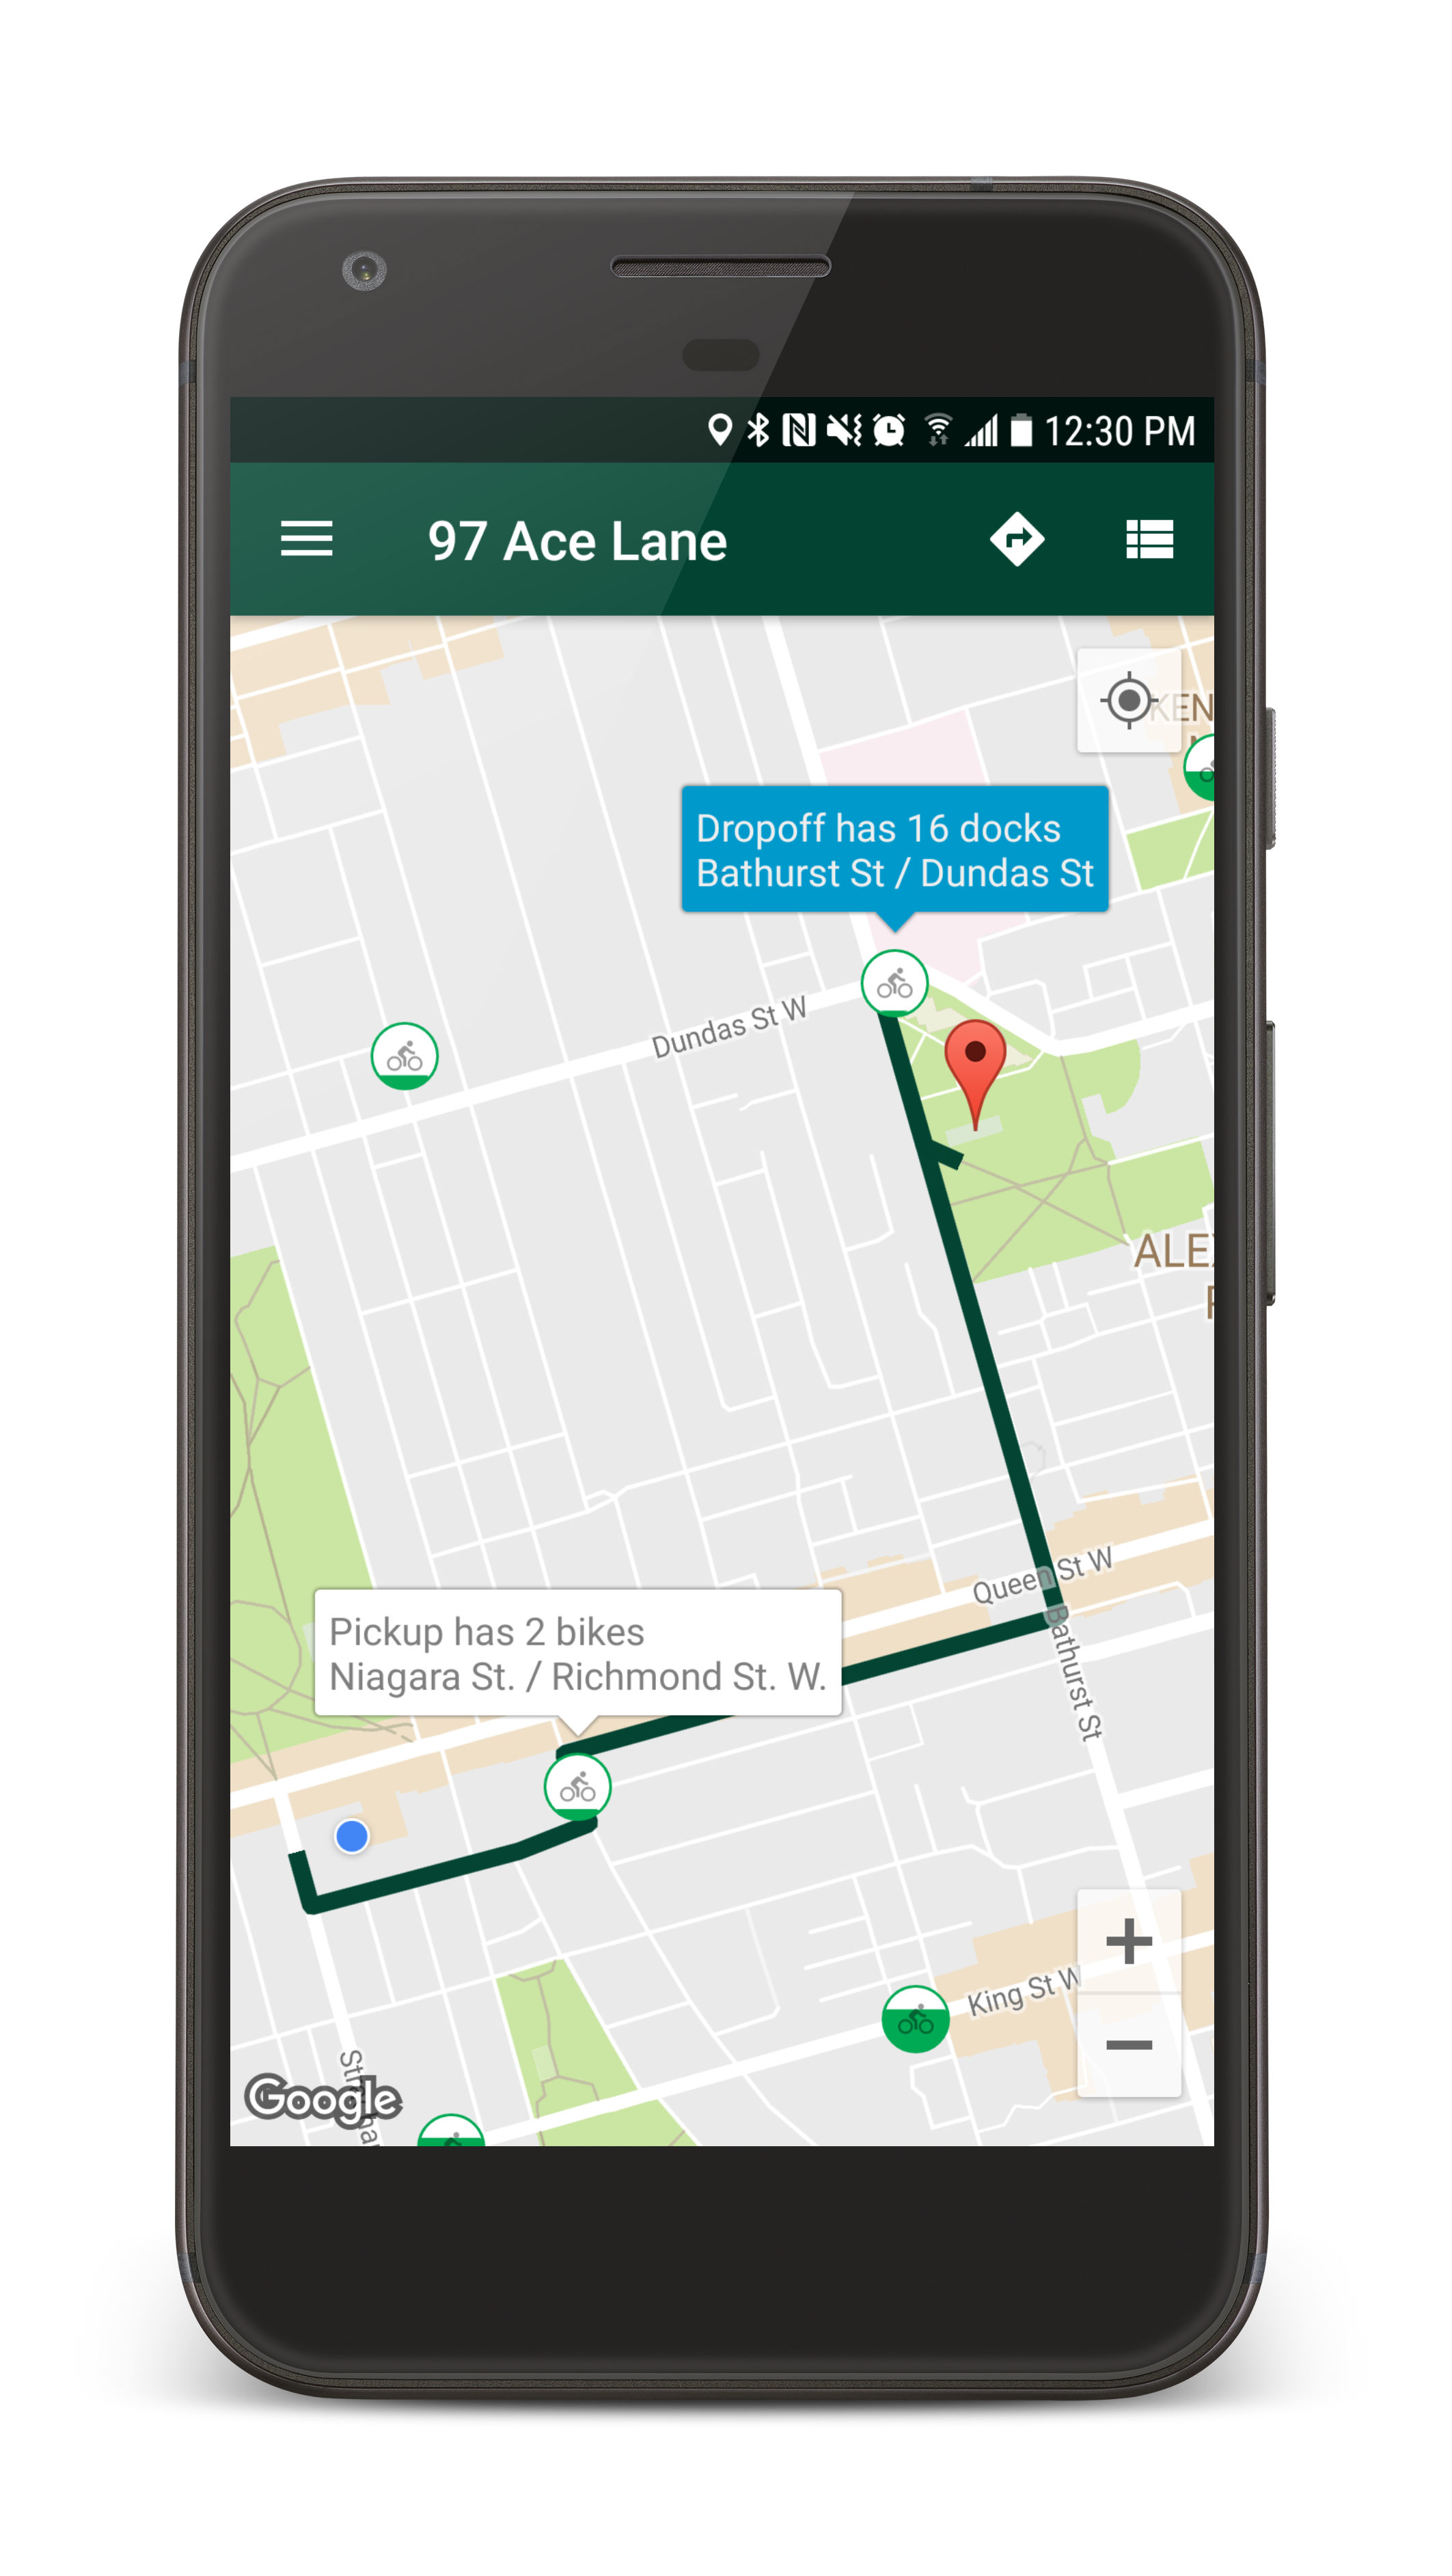 View bus and streetcars arrival times in real-time on a map.